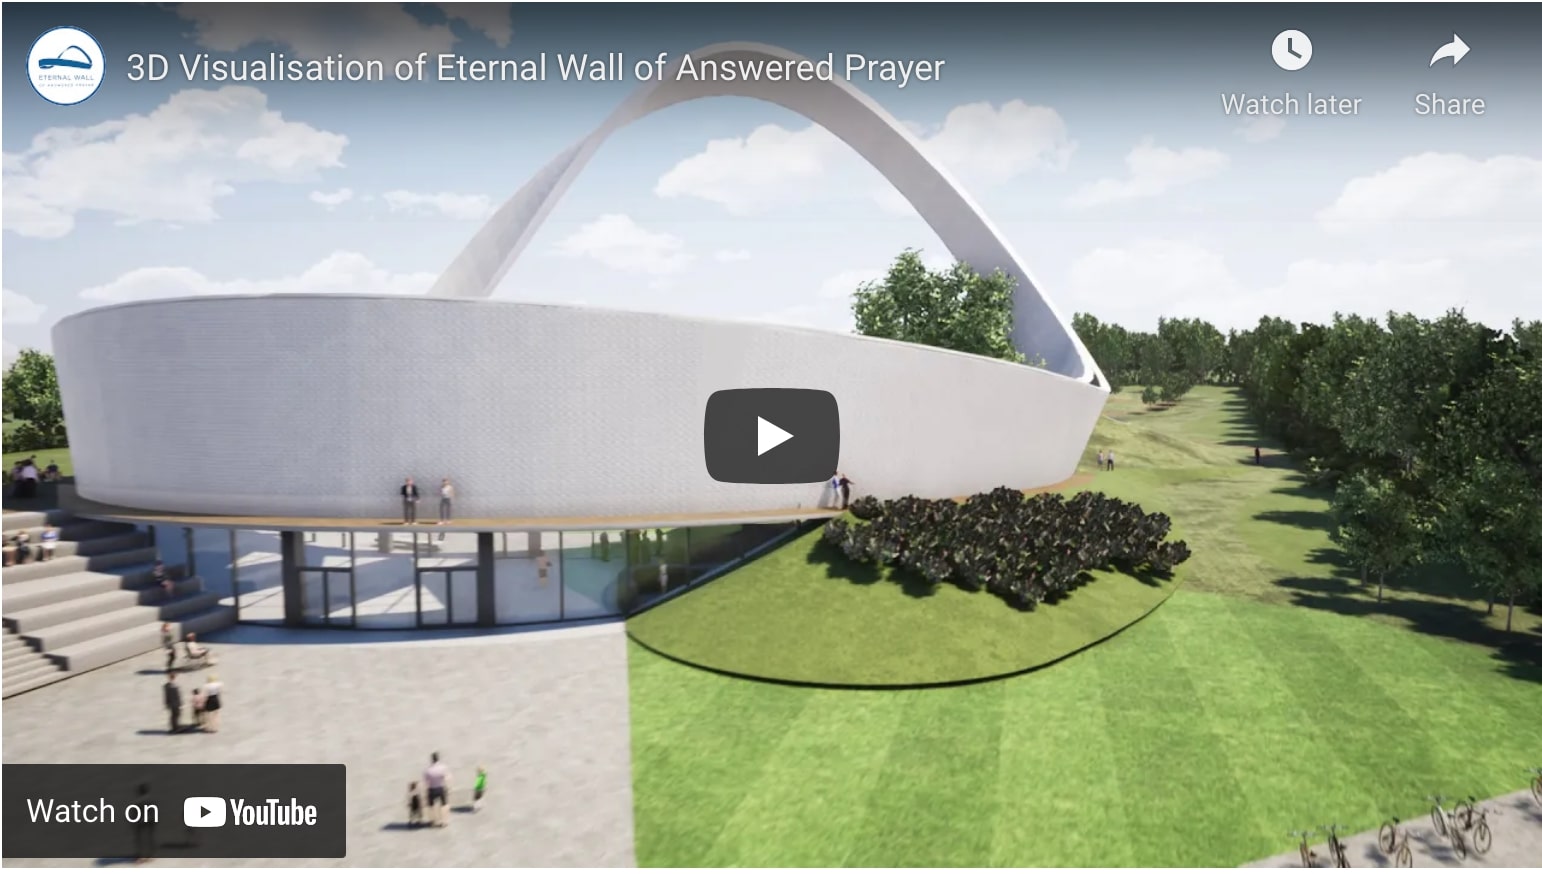 3D visualisation of the eternal wall of answered prayer